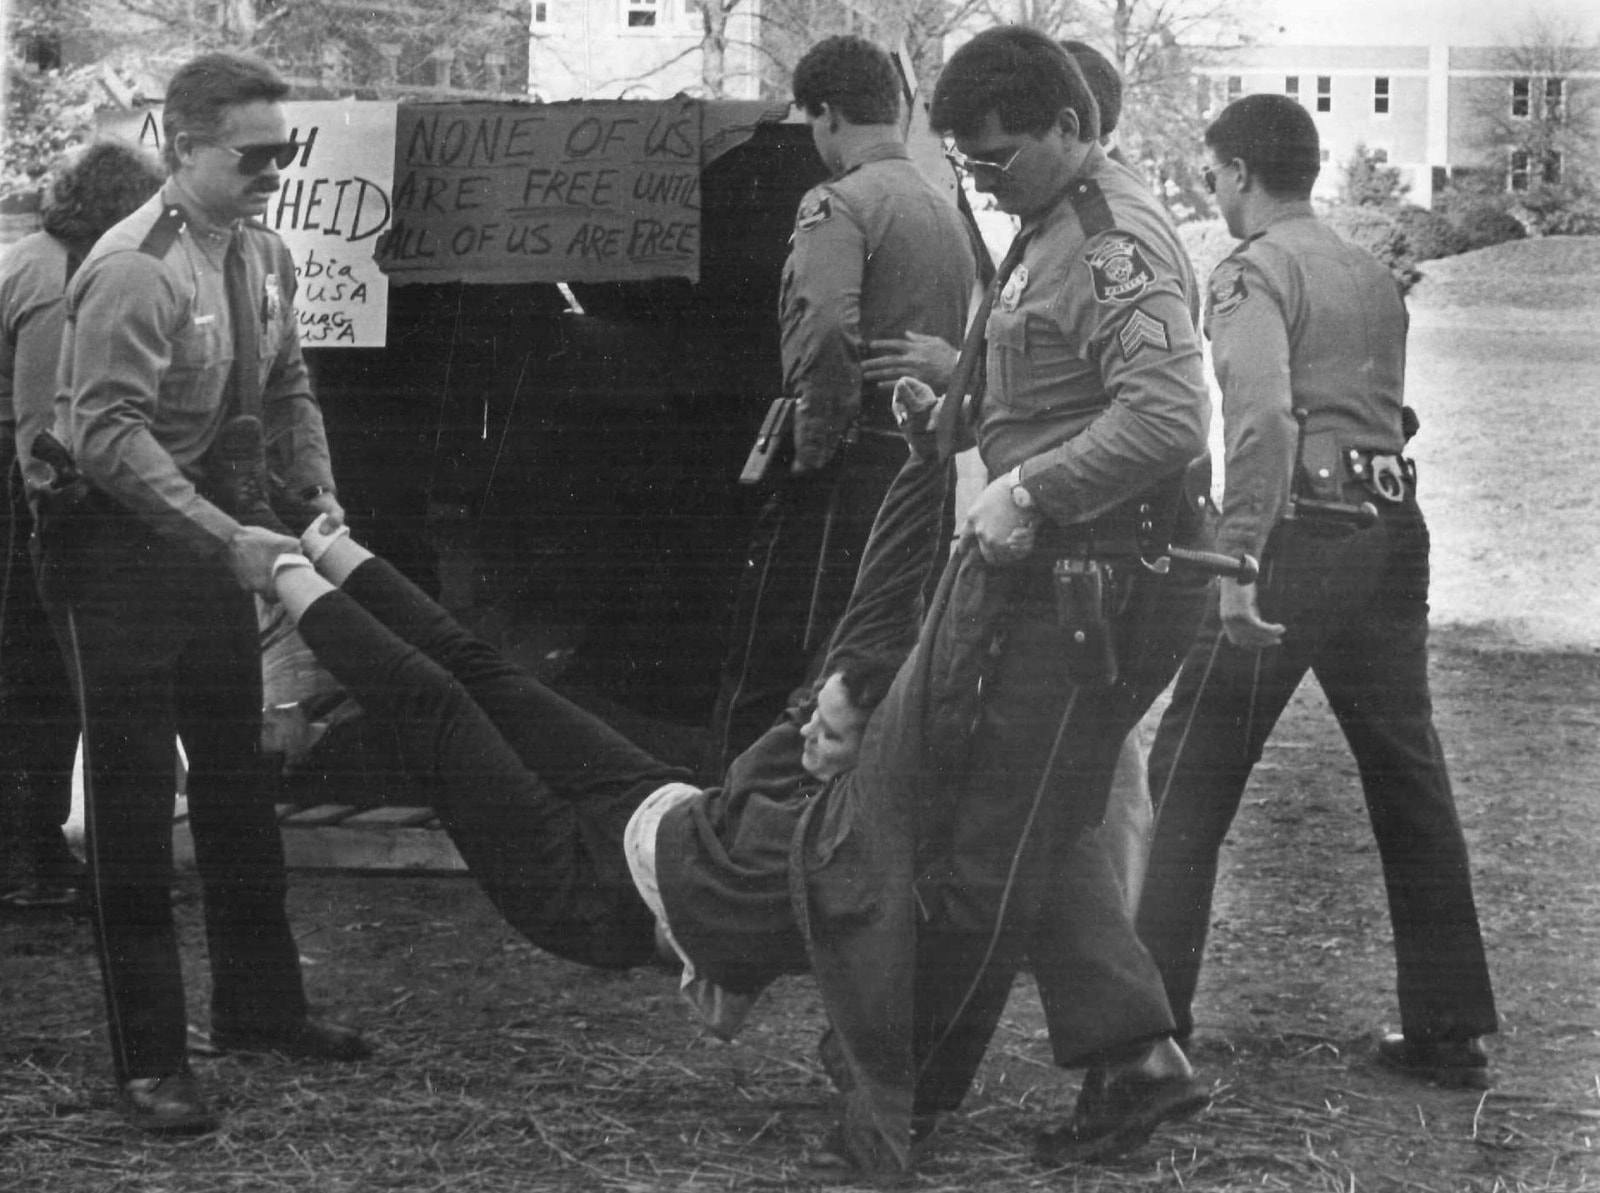 A protester goes limp as she is arrested during the anti-apartheid protests.